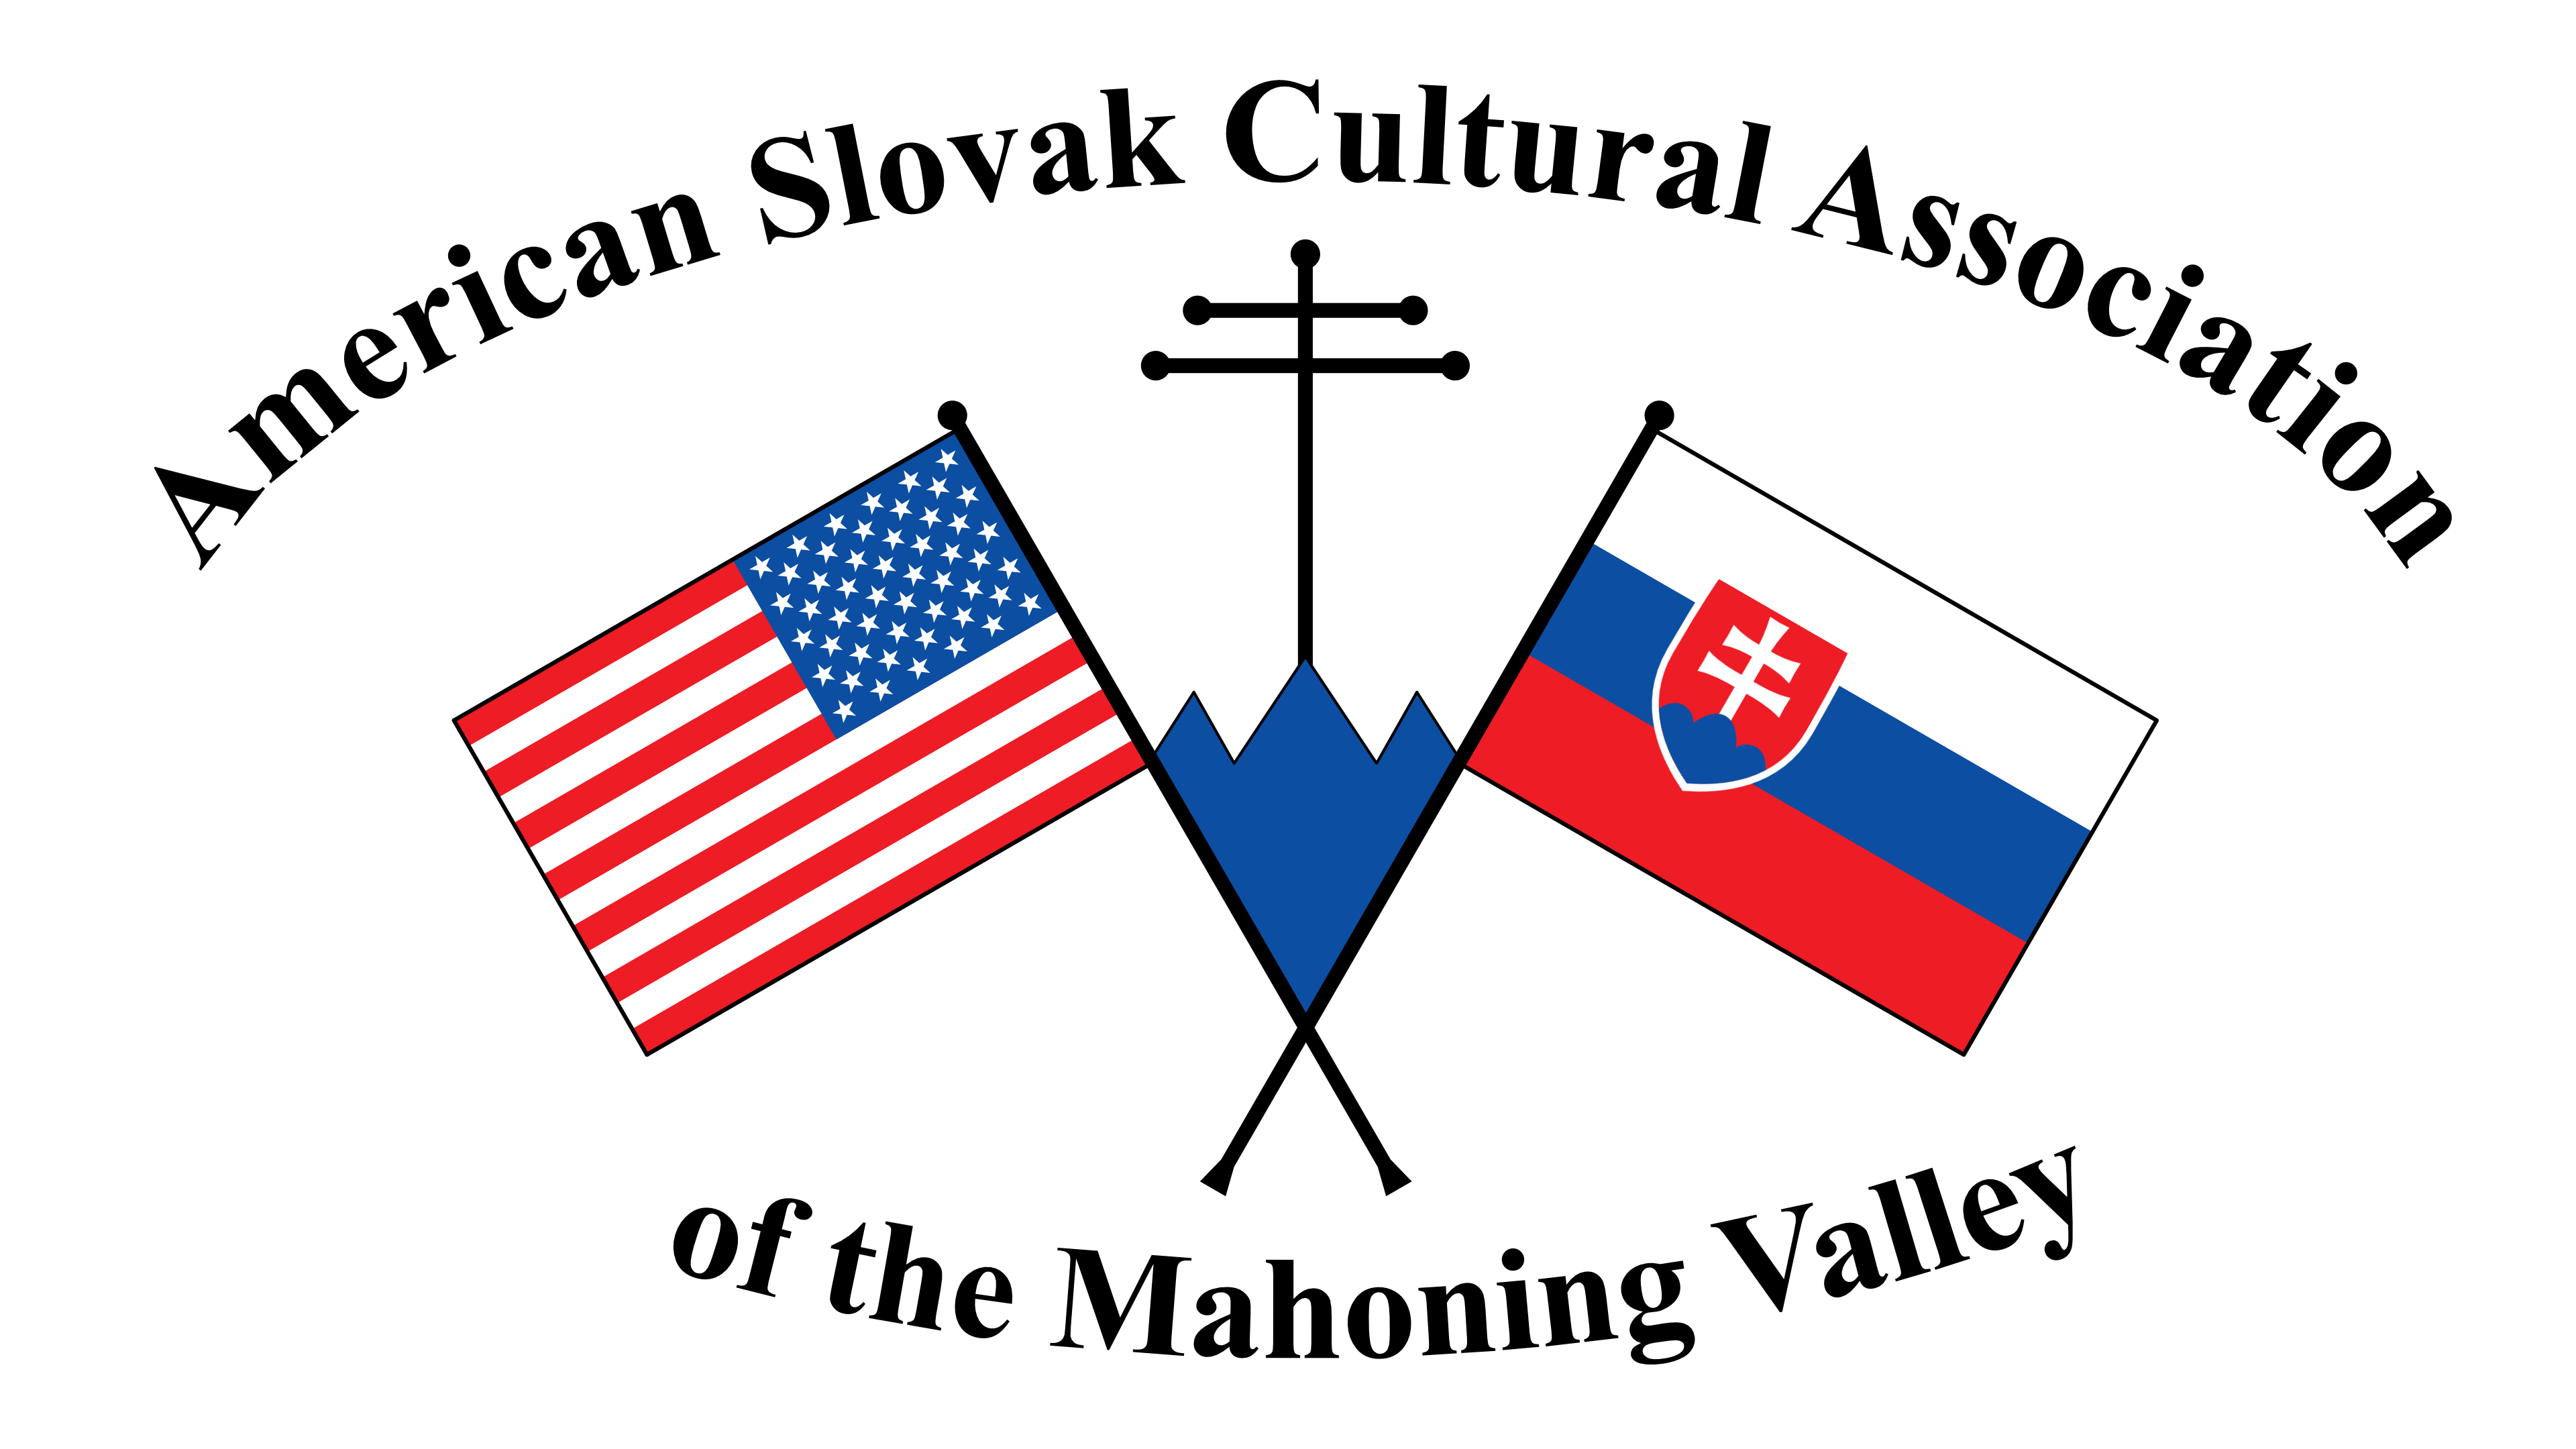 American Slovak Cultural Association of the Mahoning Valley